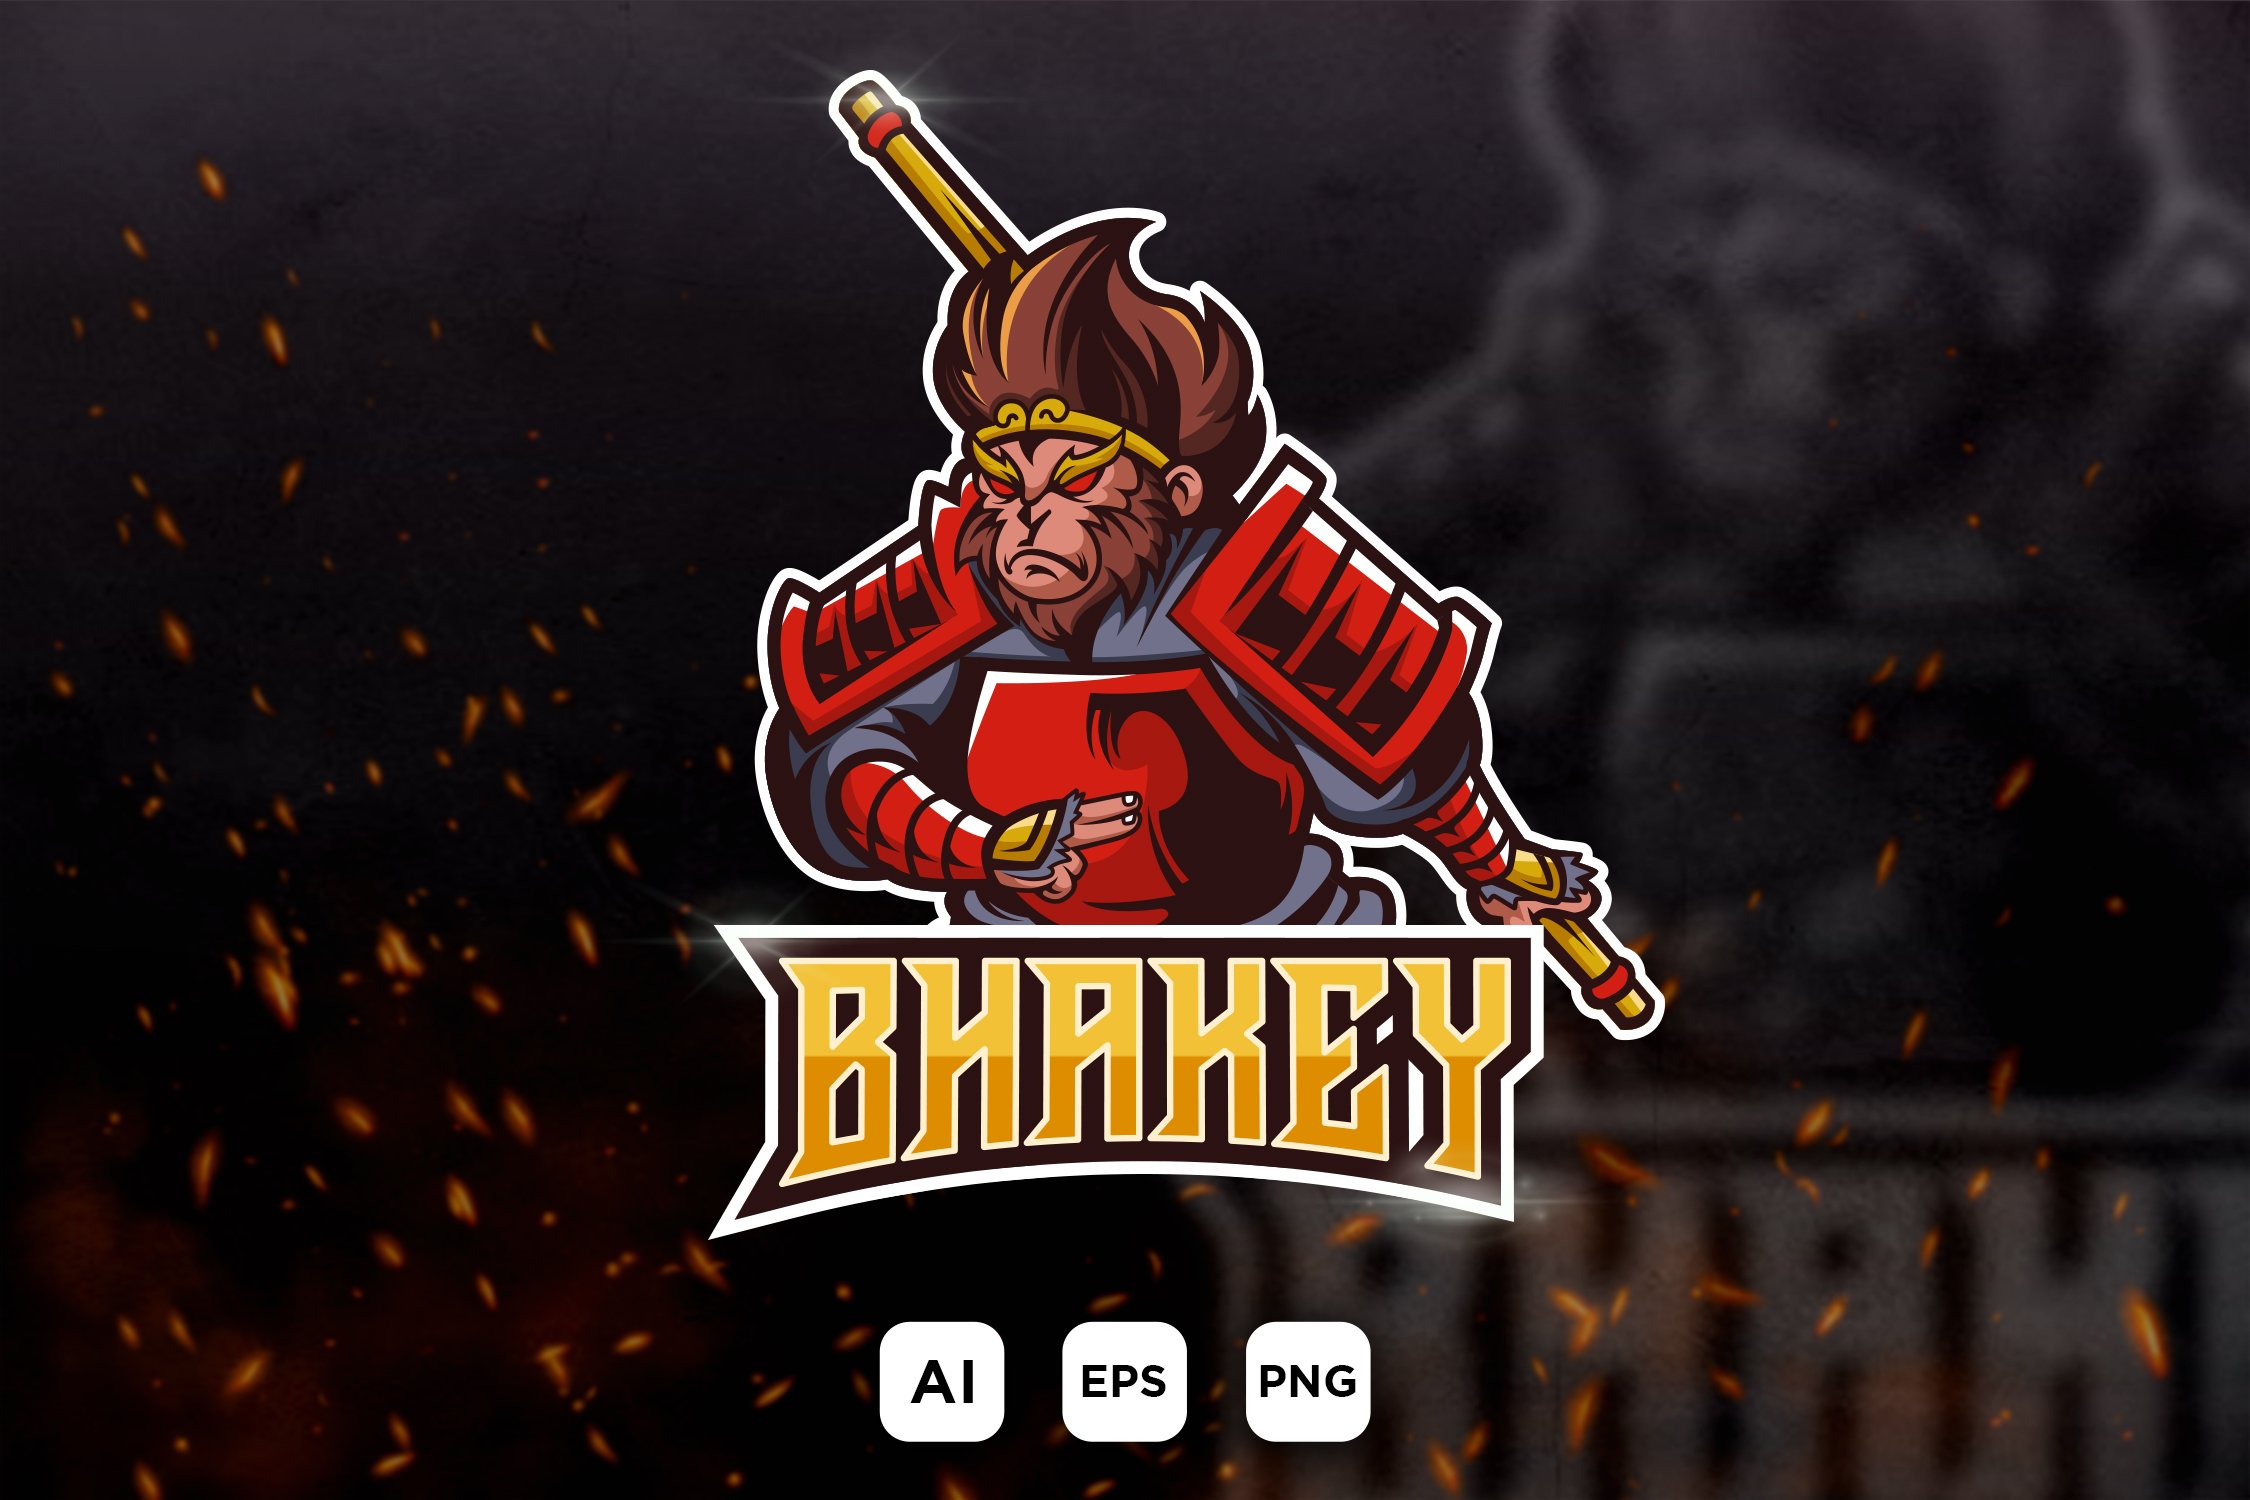 MONKEY - mascot logo for a team cover image.